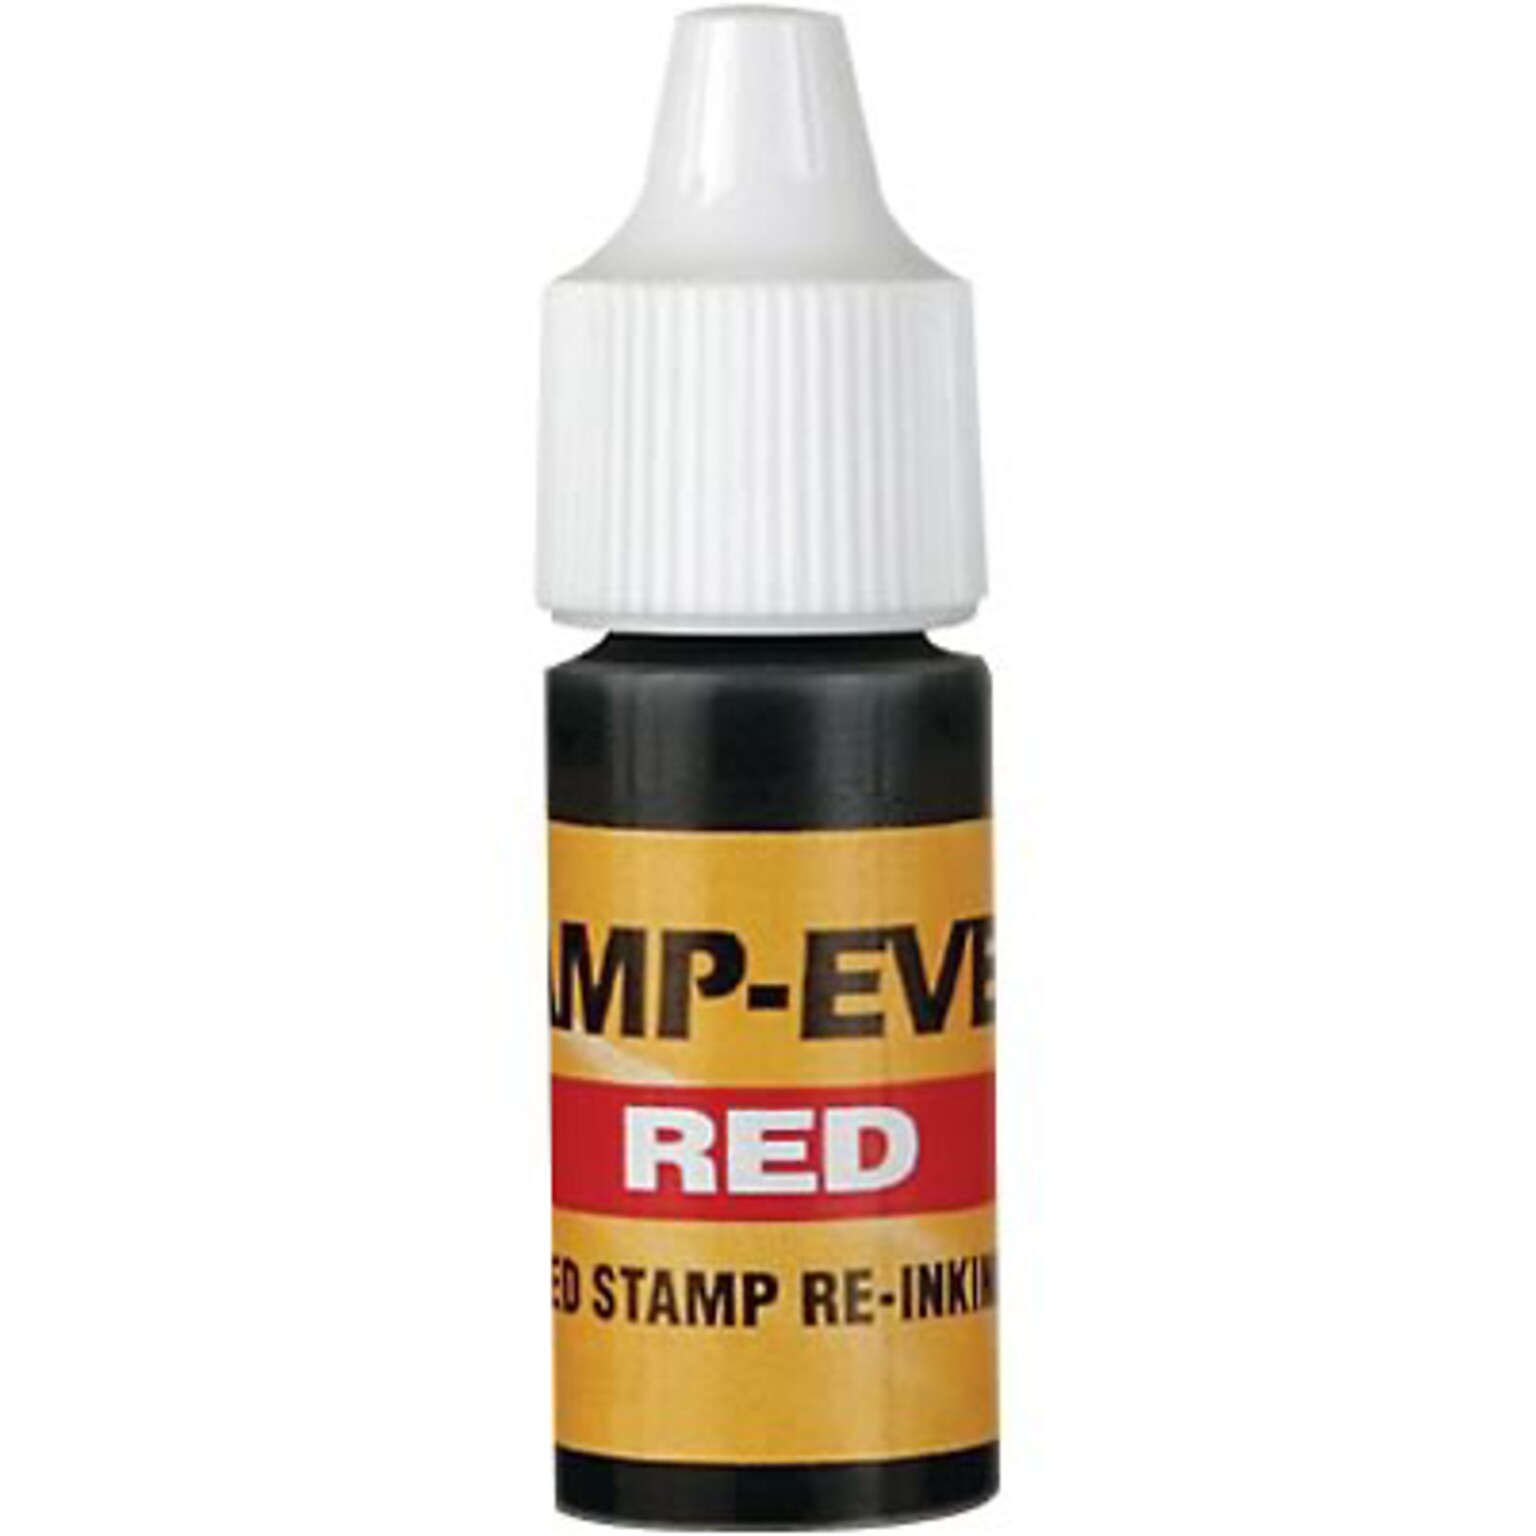 Re-inking Fluid for Stamp-Ever Pre-inked Stamps; Red